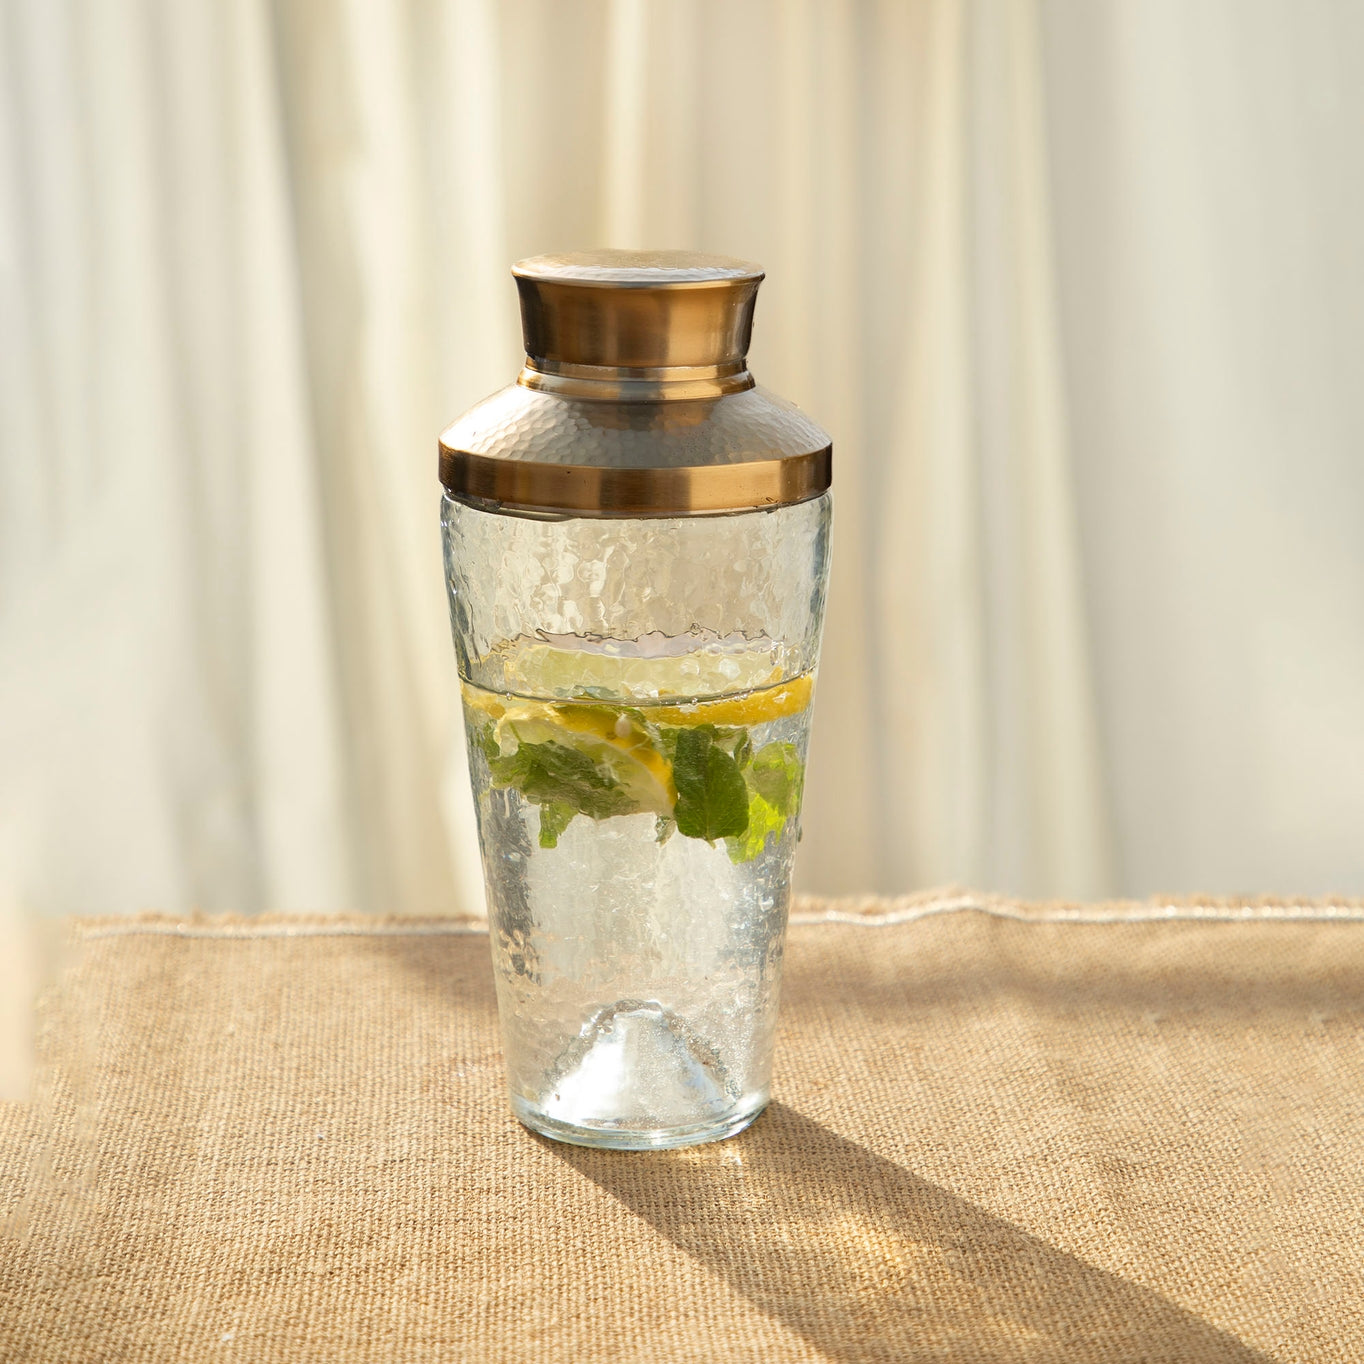 Elevate your mixology game with this stylish pebbled glass cocktail shaker, featuring a hammered, brass-like stainless steel lid crowning a lightly dimpled glass body. 